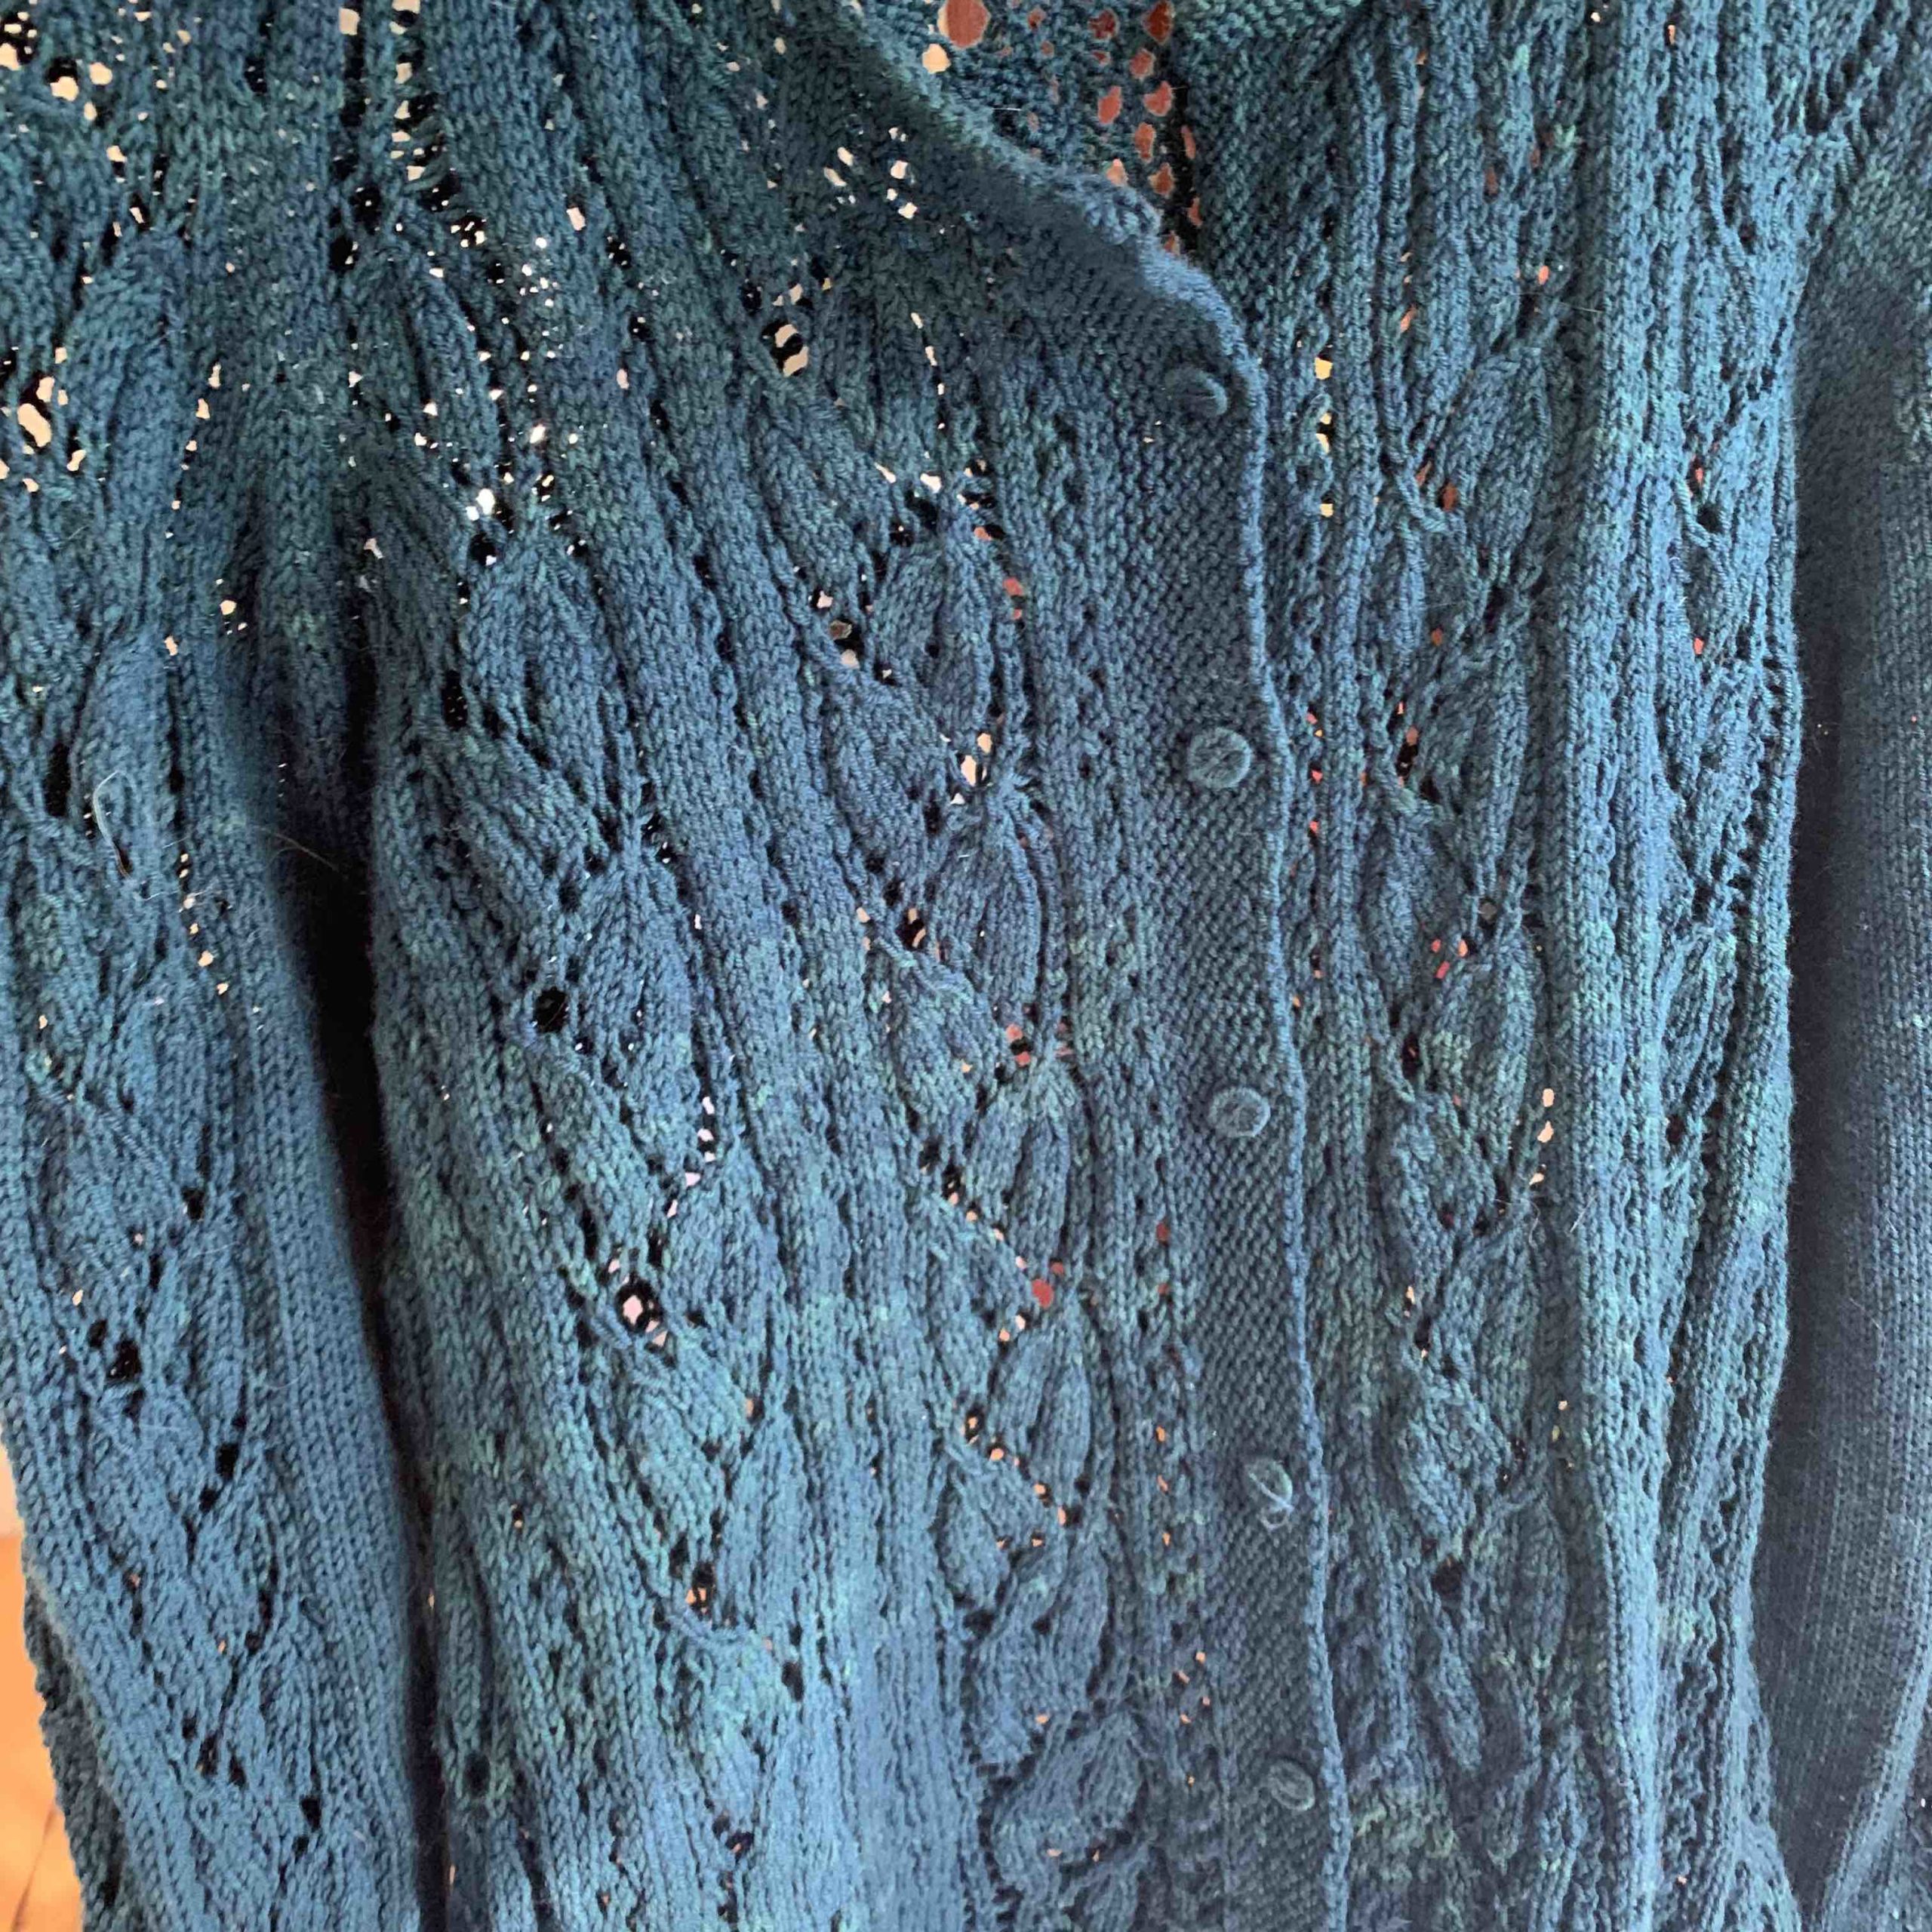 Dorset buttons on a lace cardigan knit by Alanna Nelson